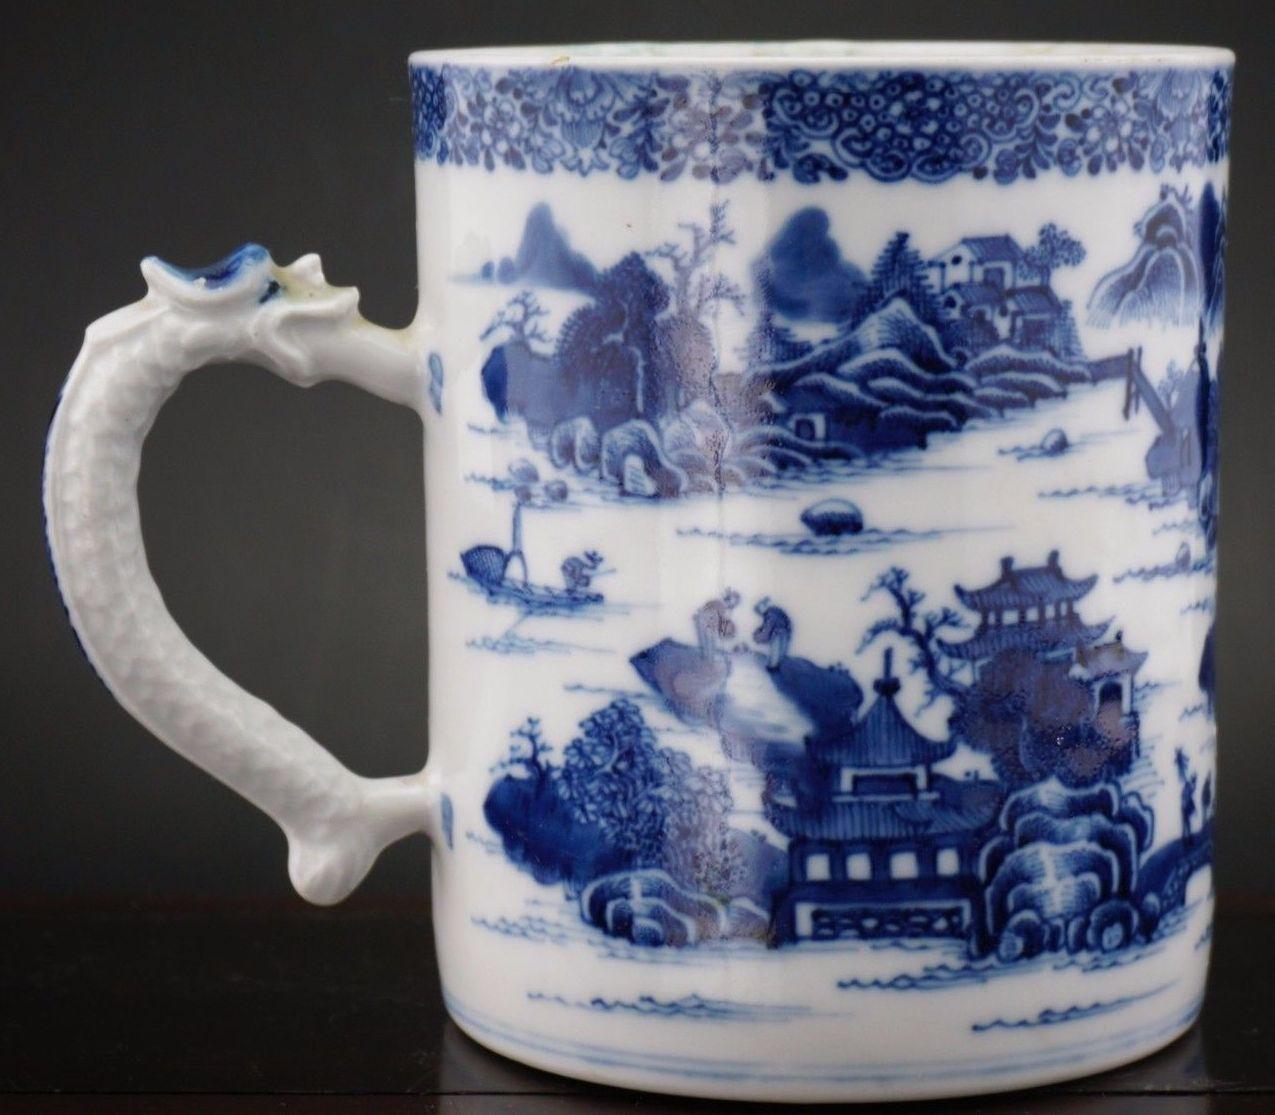 A very fine Chinese export hand decorated blue and white porcelain tankard of unusually large proportions, superbly decorated depicting a continuous view of a Chinese village with a river and landscape scene. Applied decorative moulded dragon